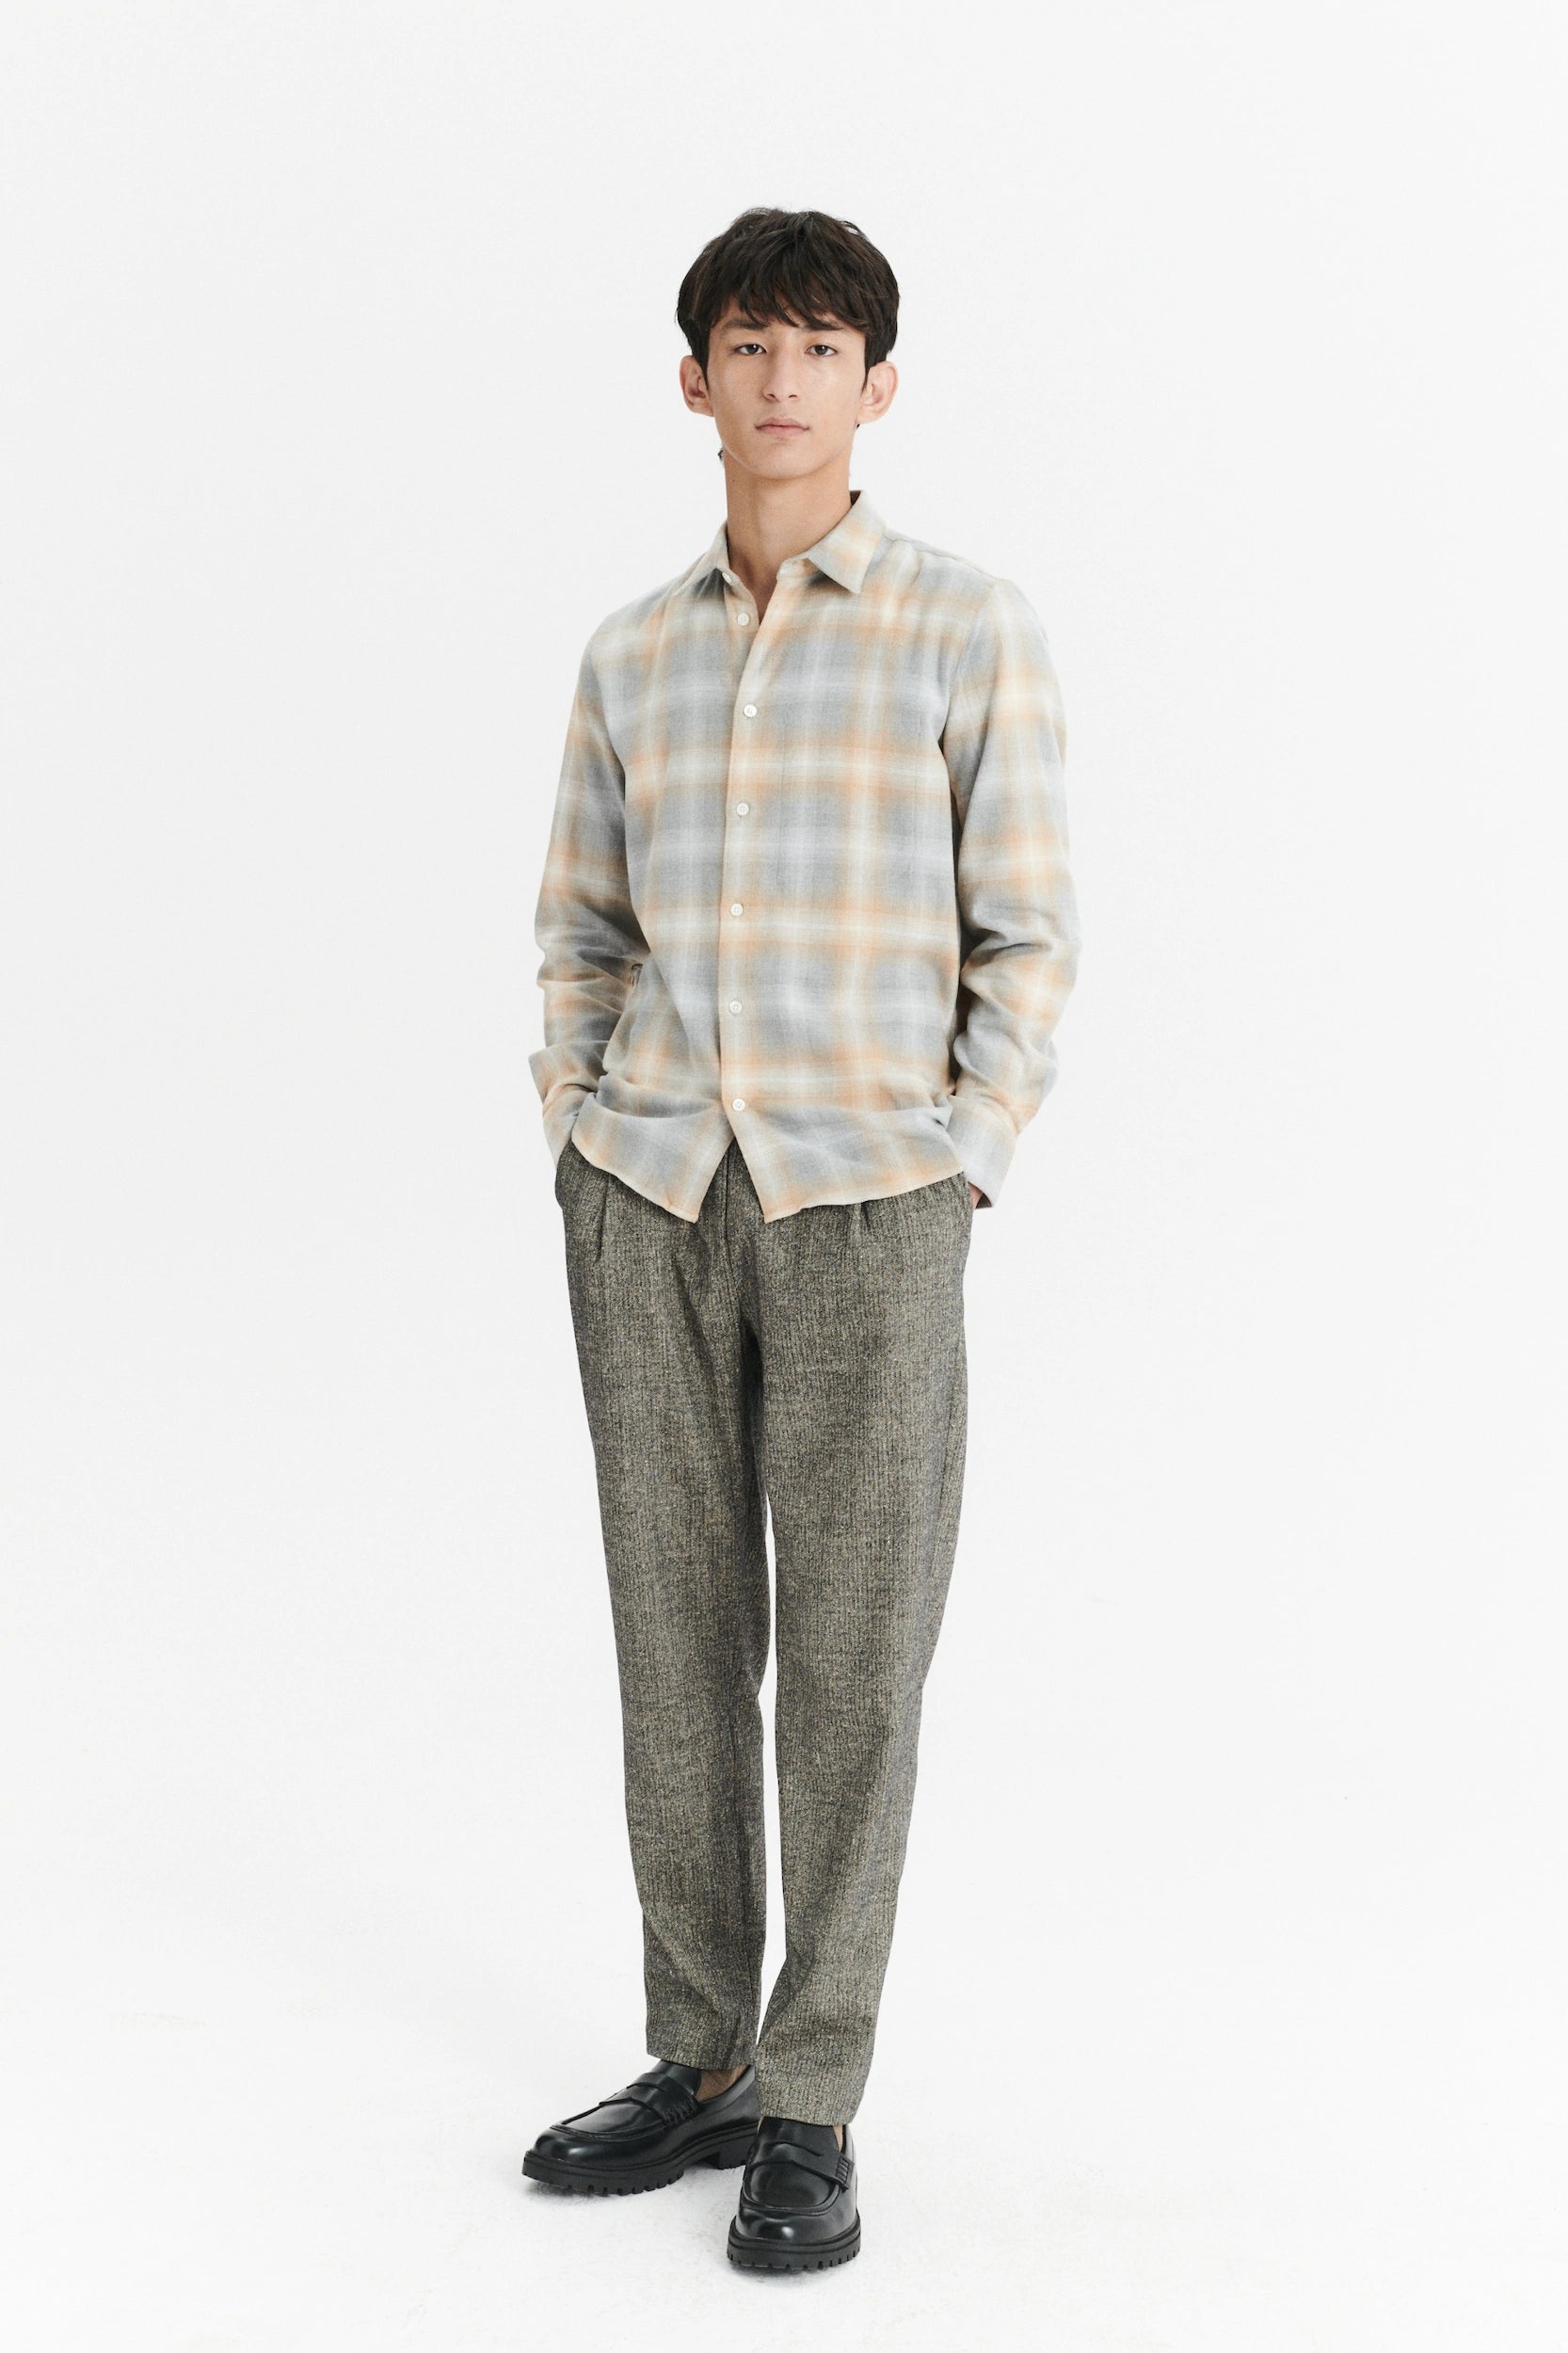 Feel Good Shirt in a Soft Tonal Beige and Grey Chequered Italian Cotto -  Delikatessen